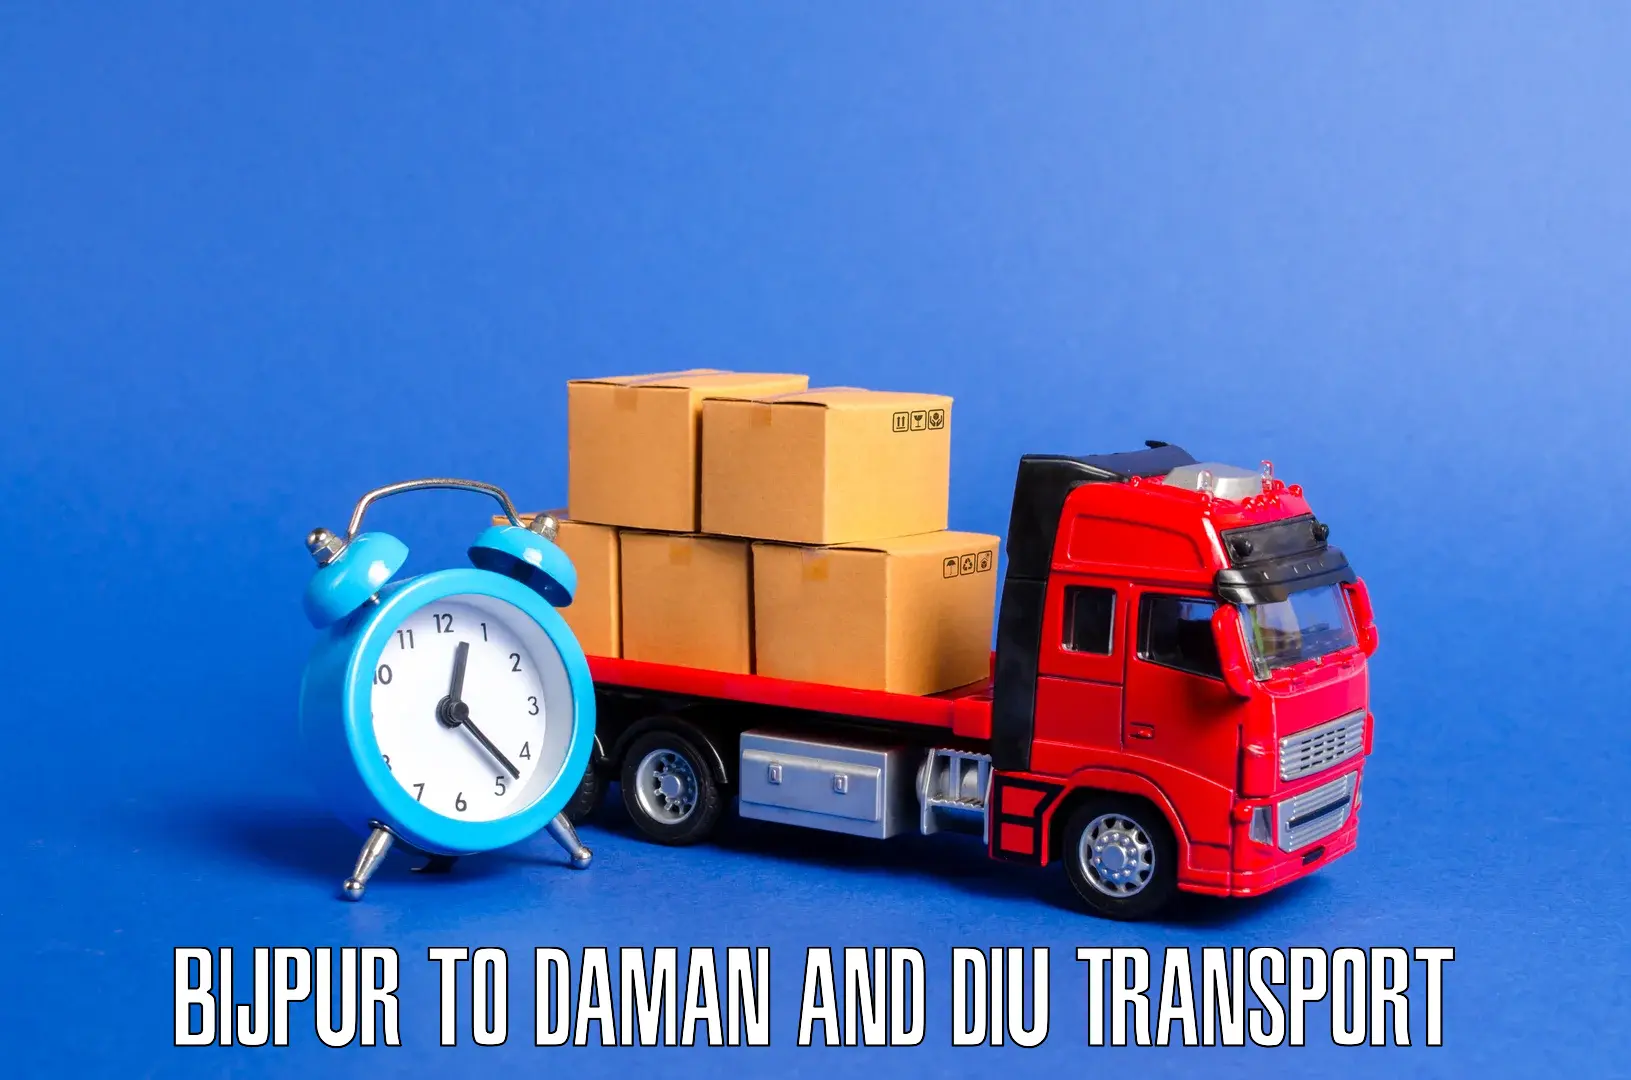 Delivery service Bijpur to Daman and Diu